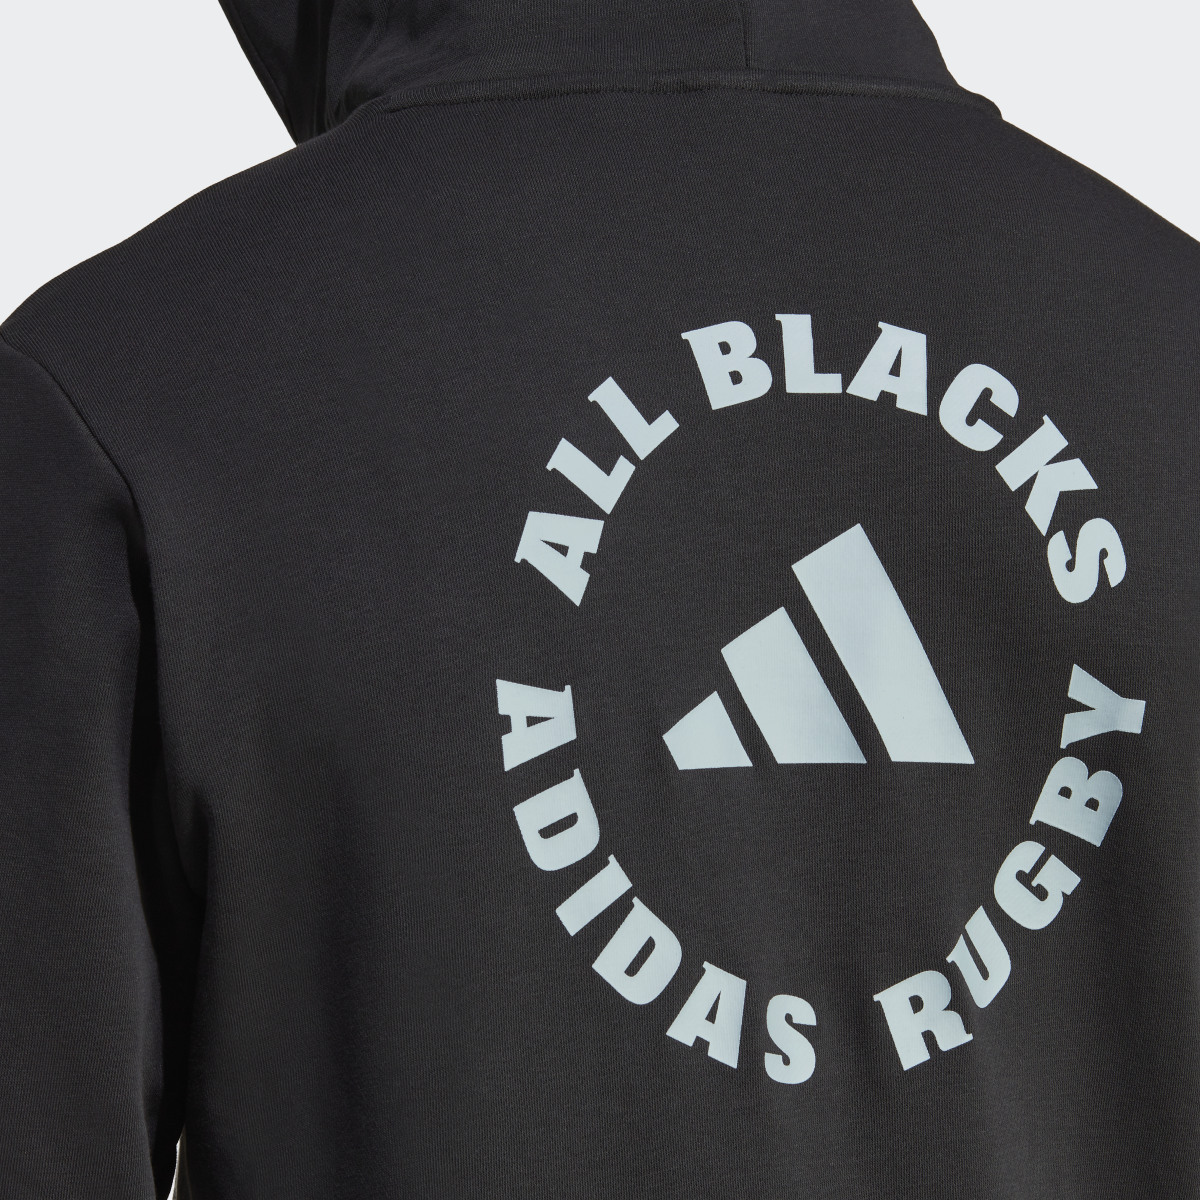 Adidas All Blacks Rugby Supporters Hoodie. 8